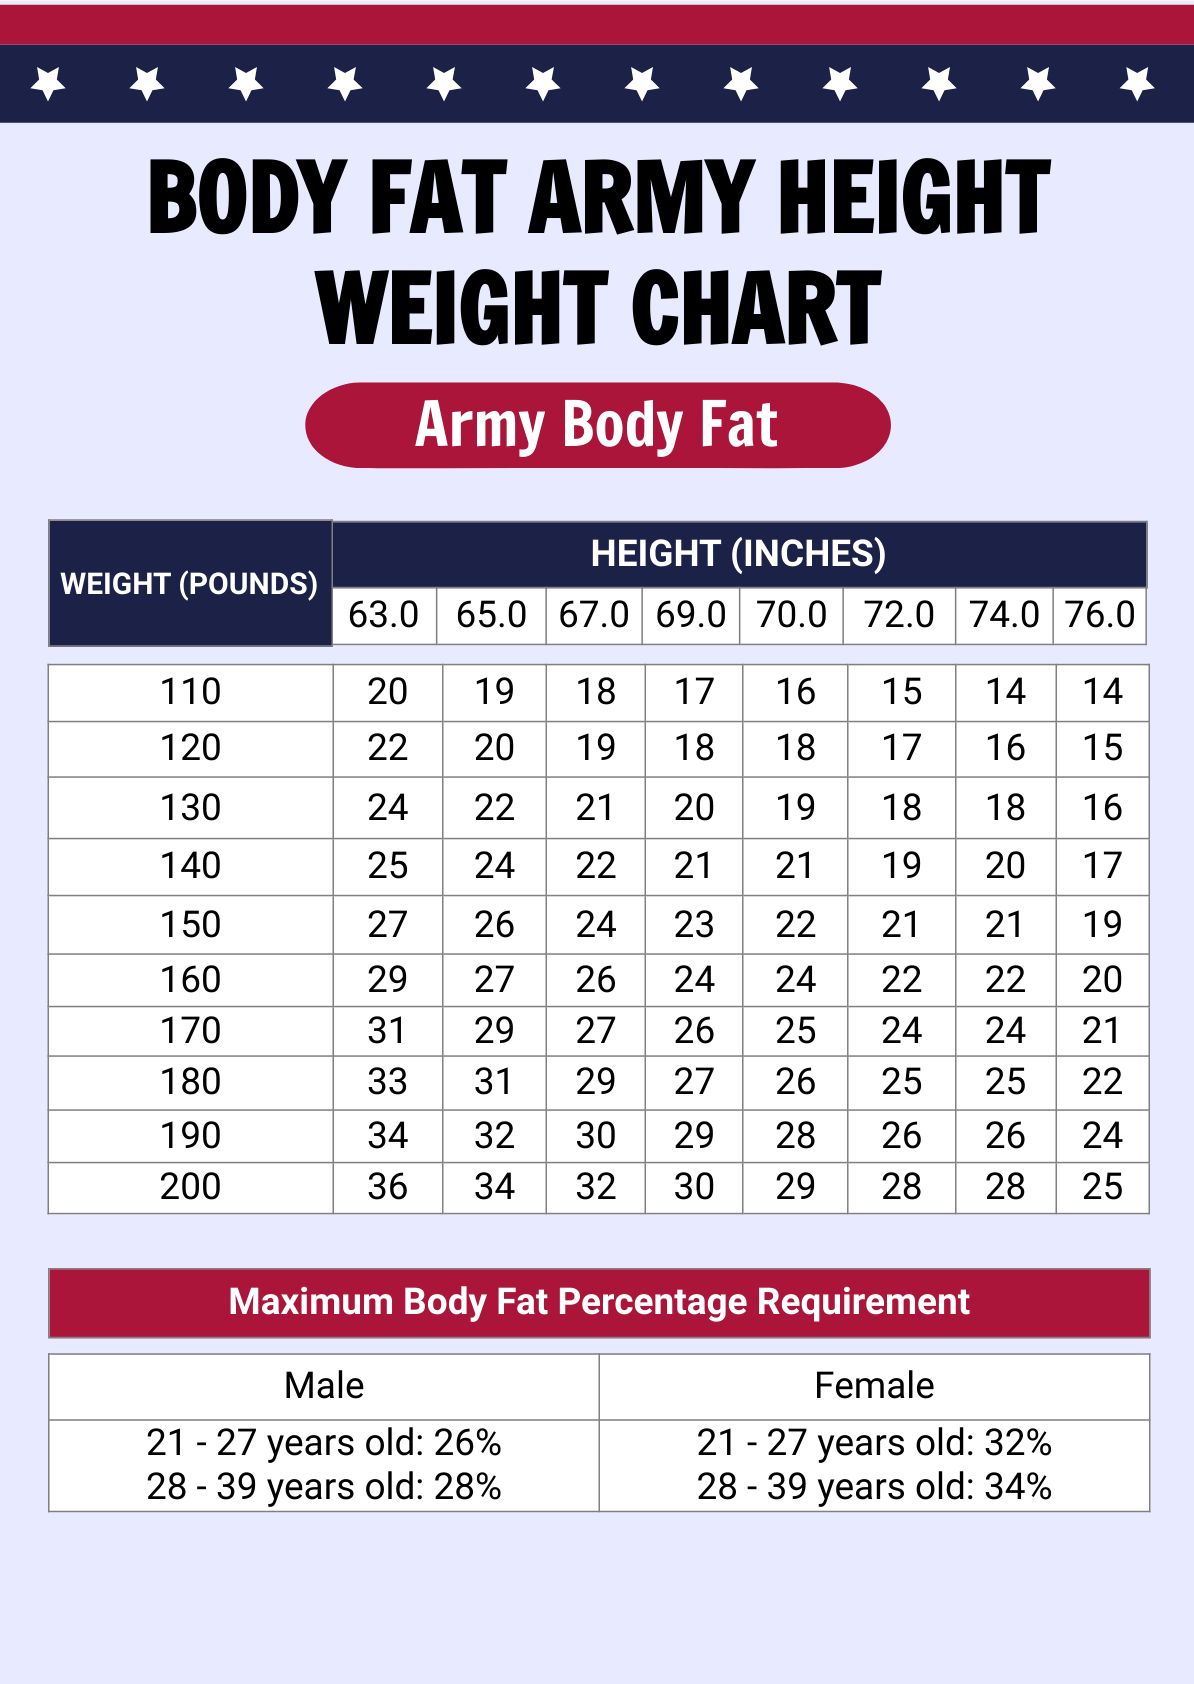 body-fat-army-height-weight-chart